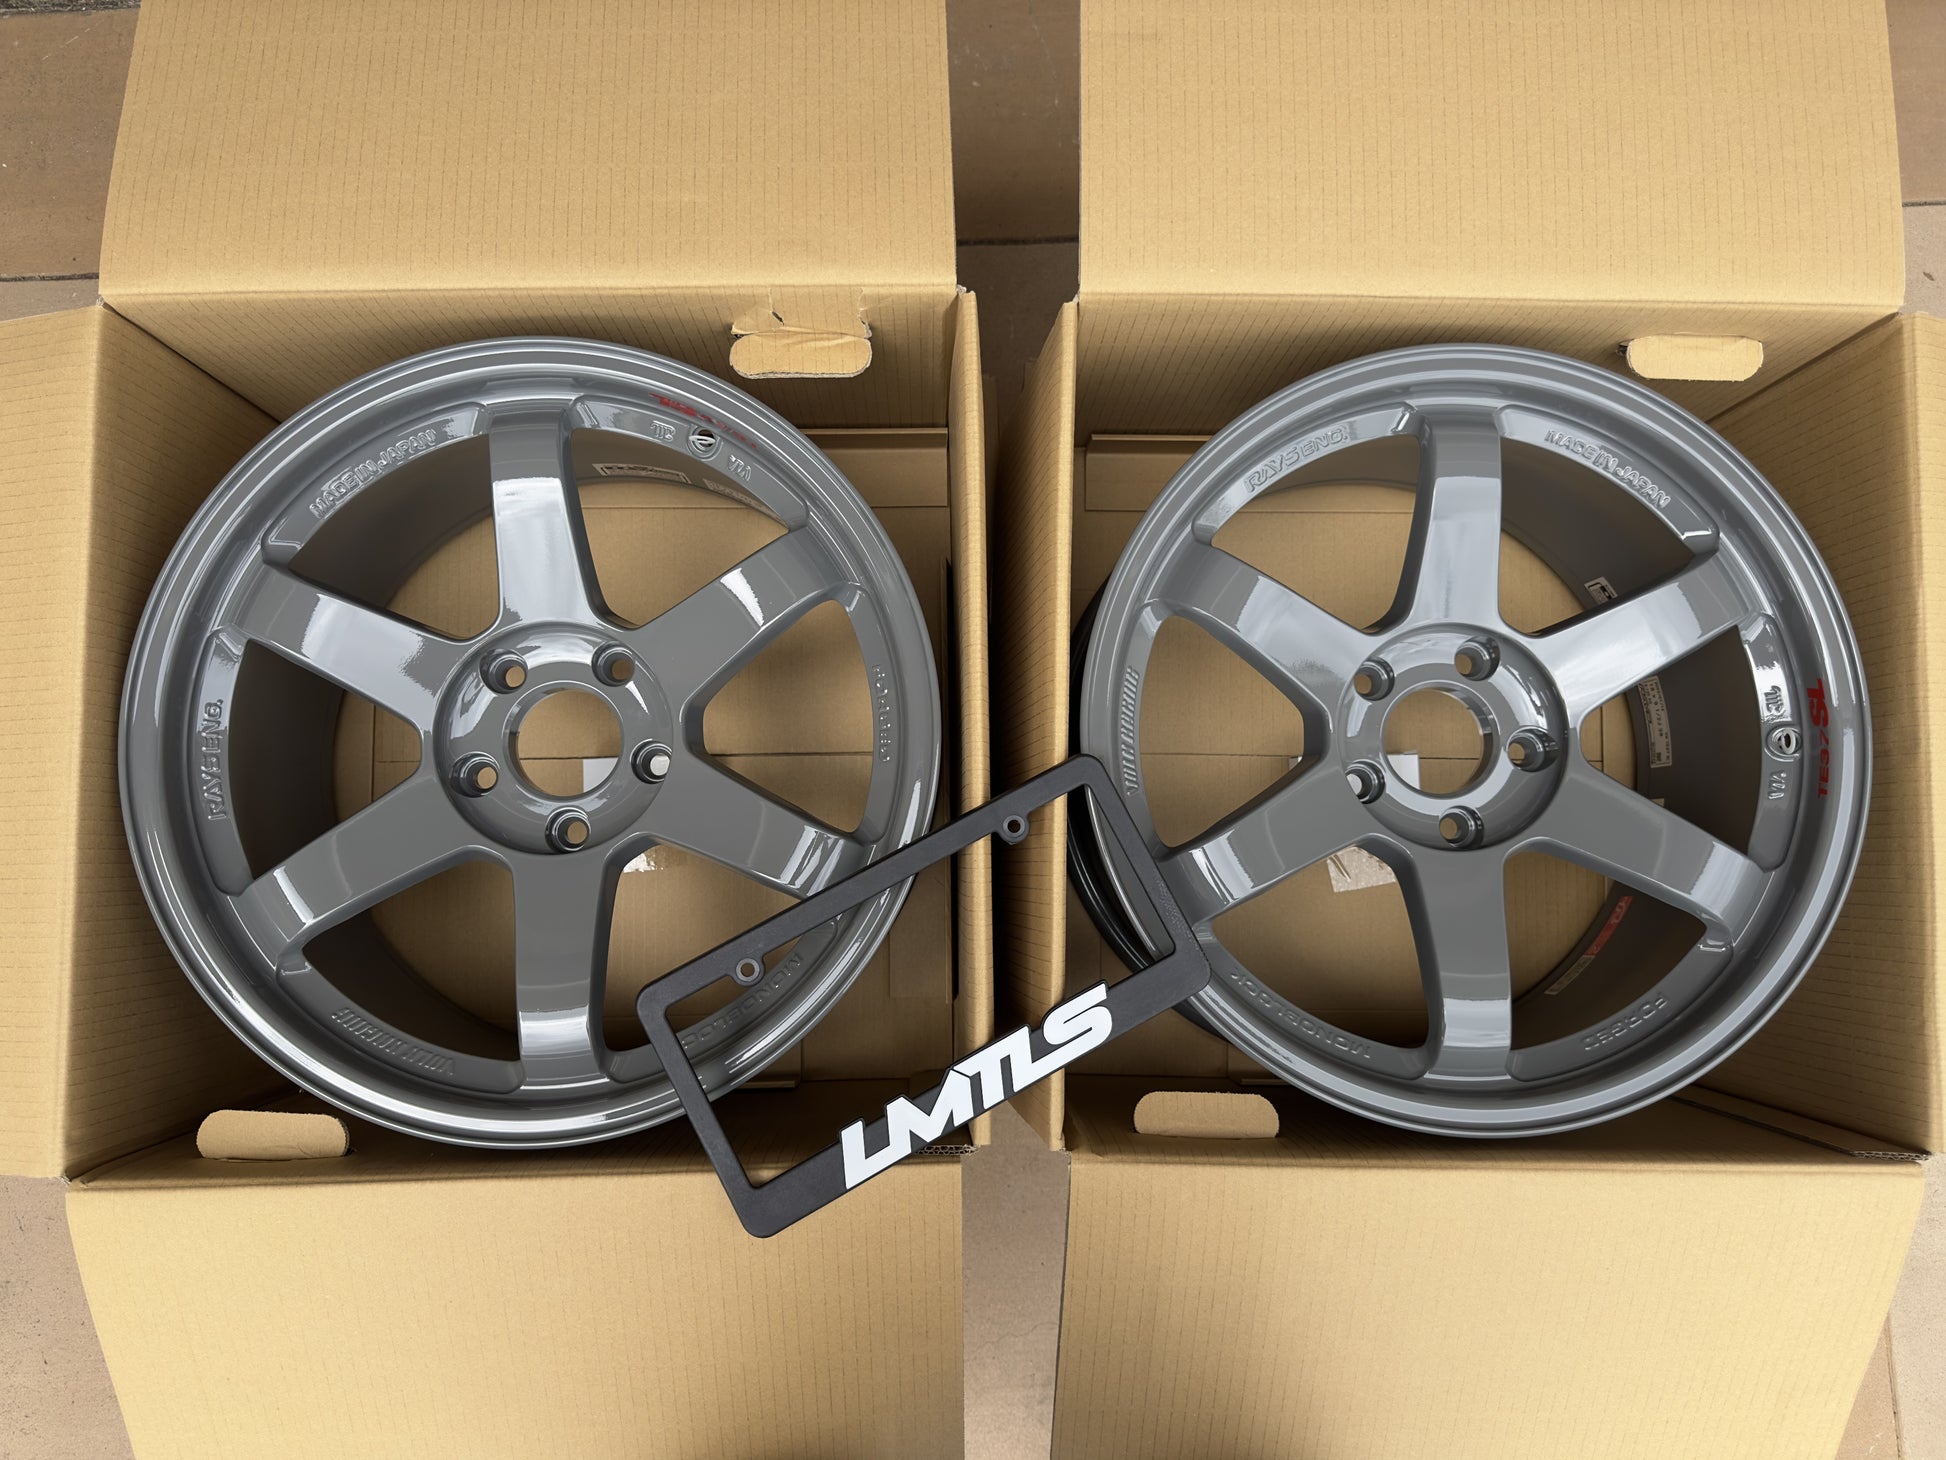 This special version of the TE37 is even lighter than the original TE37. According to Rays, on a 18x10.5 size, the weight of the TE37 SL has been reduced by 400gramsWheelsRAYS Wheels